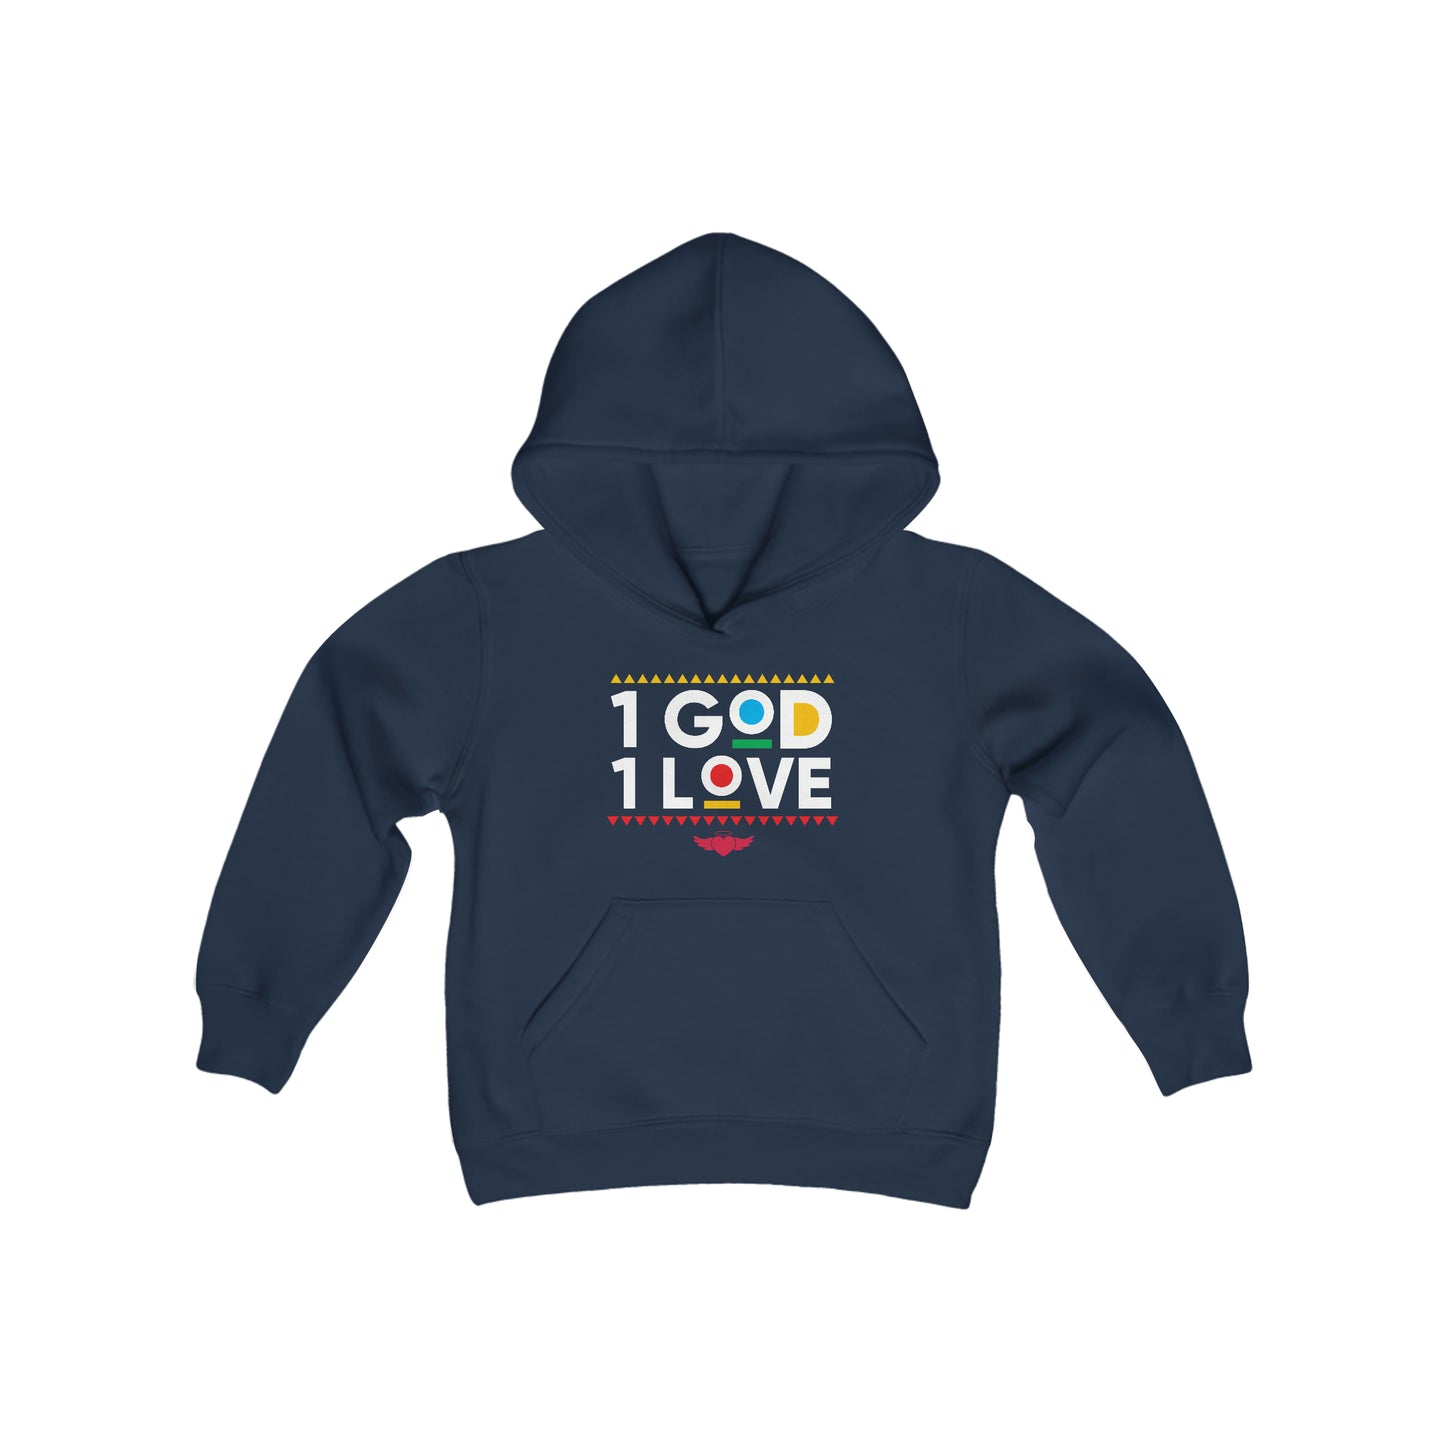 1God1Love "In Living Color" Youth Heavy Blend Hooded Sweatshirt